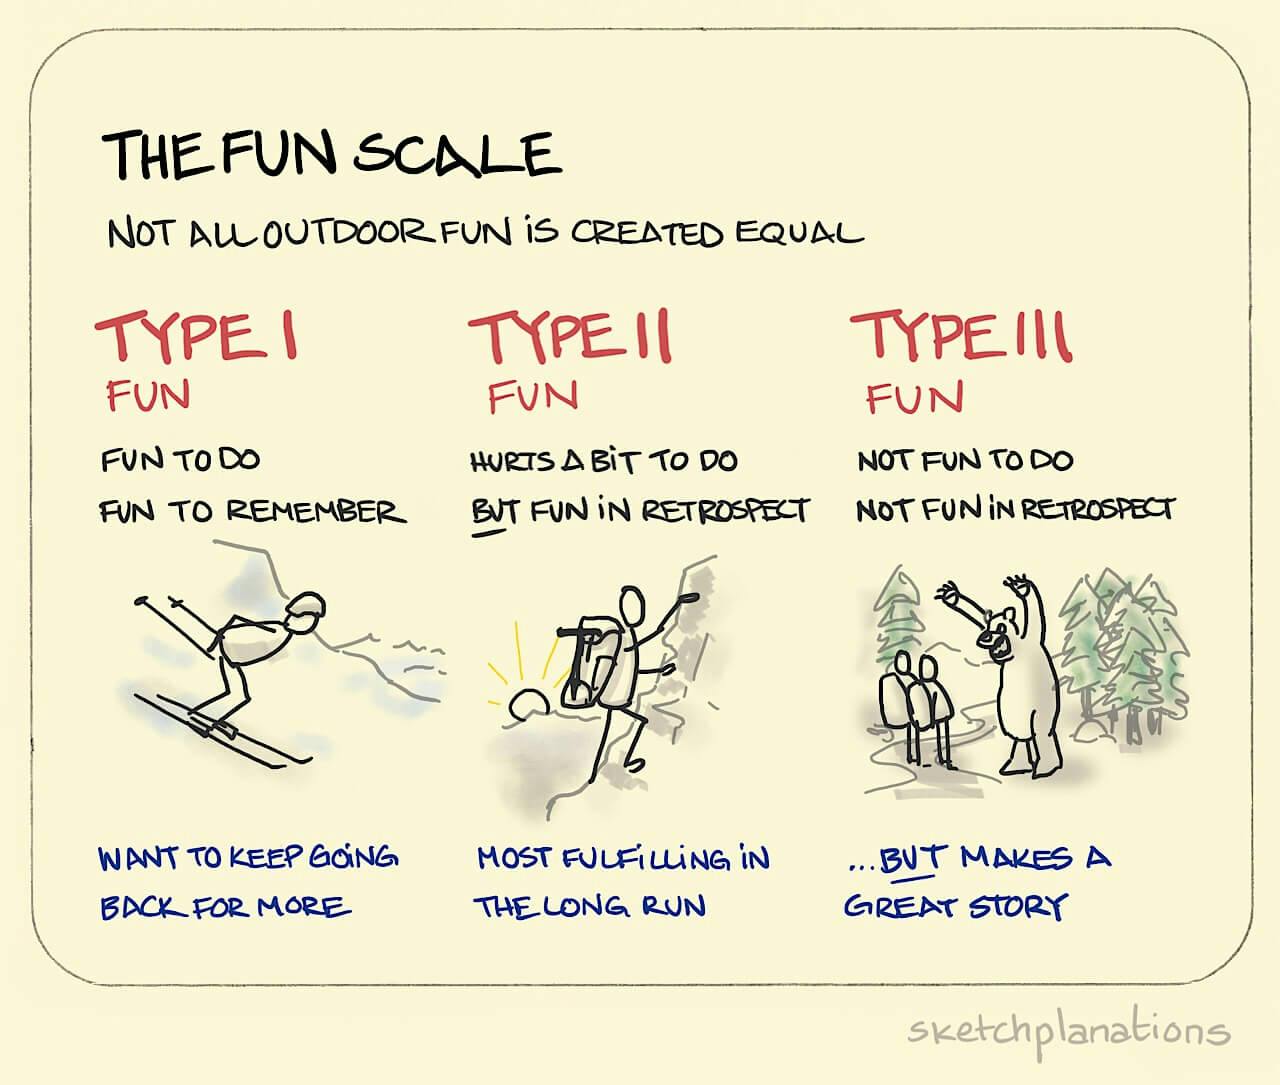 The fun scale - Sketchplanations